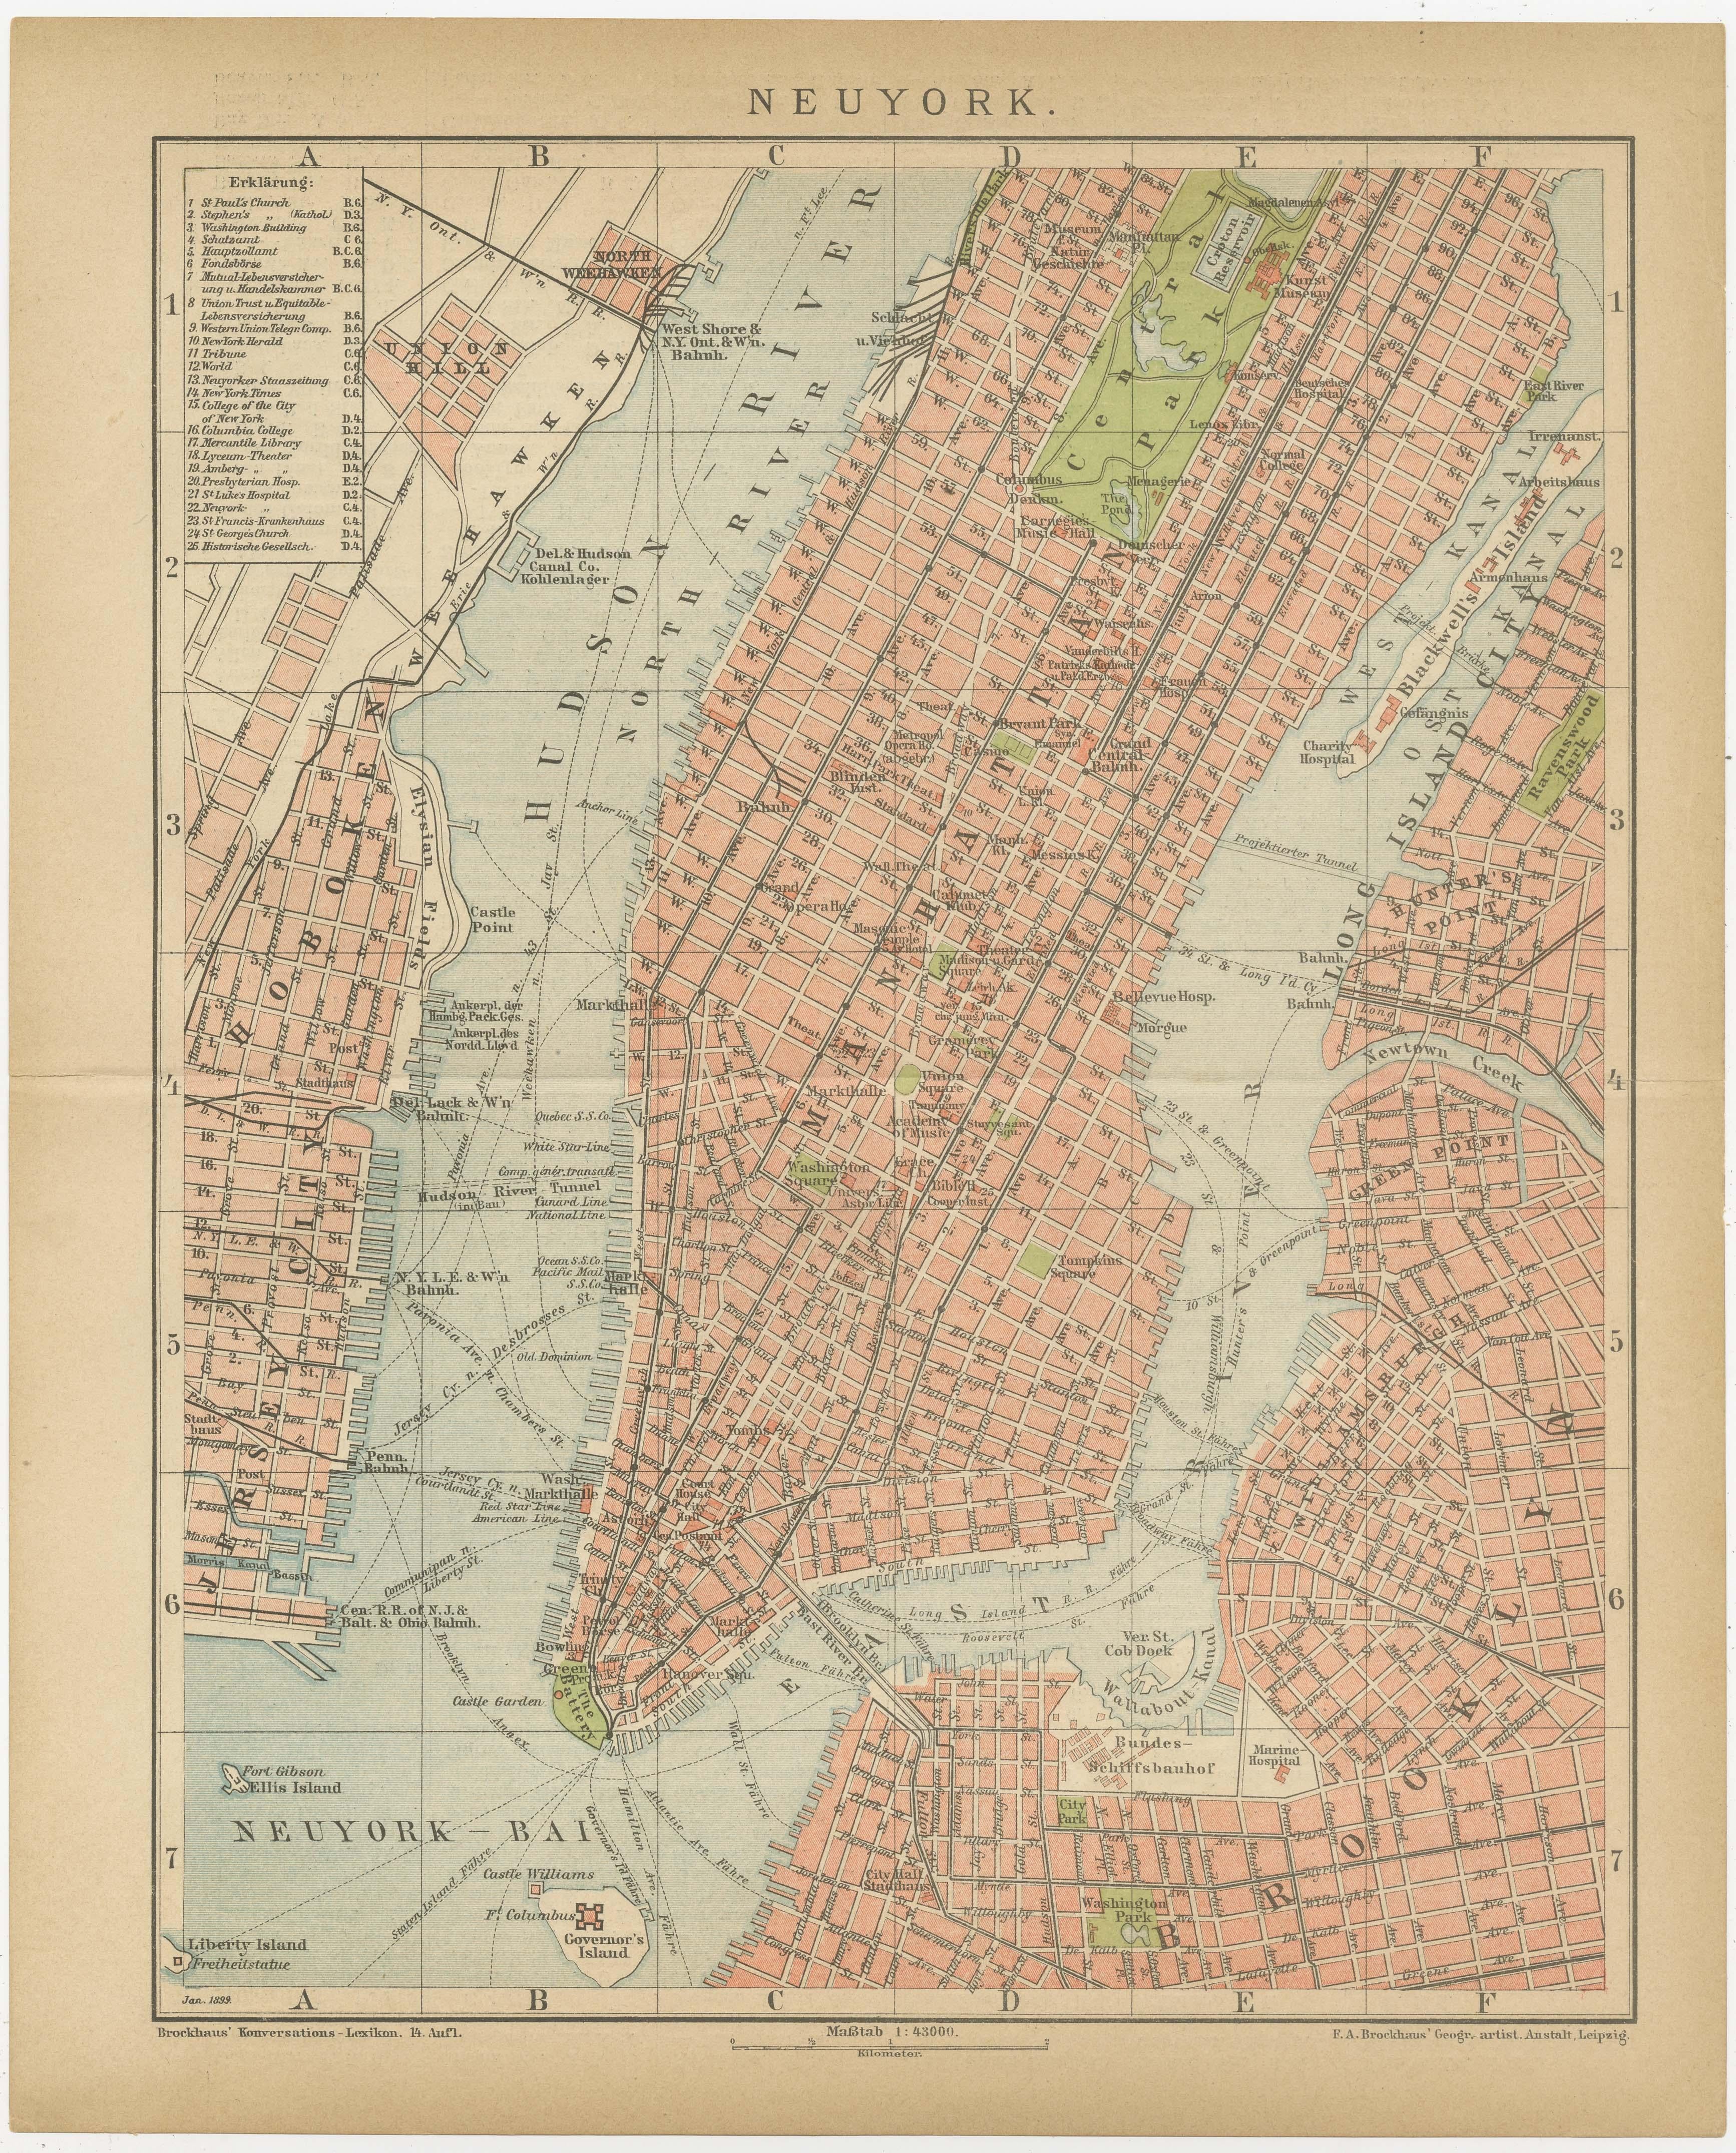 Antique map titled 'Neuyork'. Original city plan of New York, United States. Centered on Manhattan, also showing the Hudson River and East River. This print originates from the 14th edition of Brockhaus Konversations-Lexikon, published between 1896